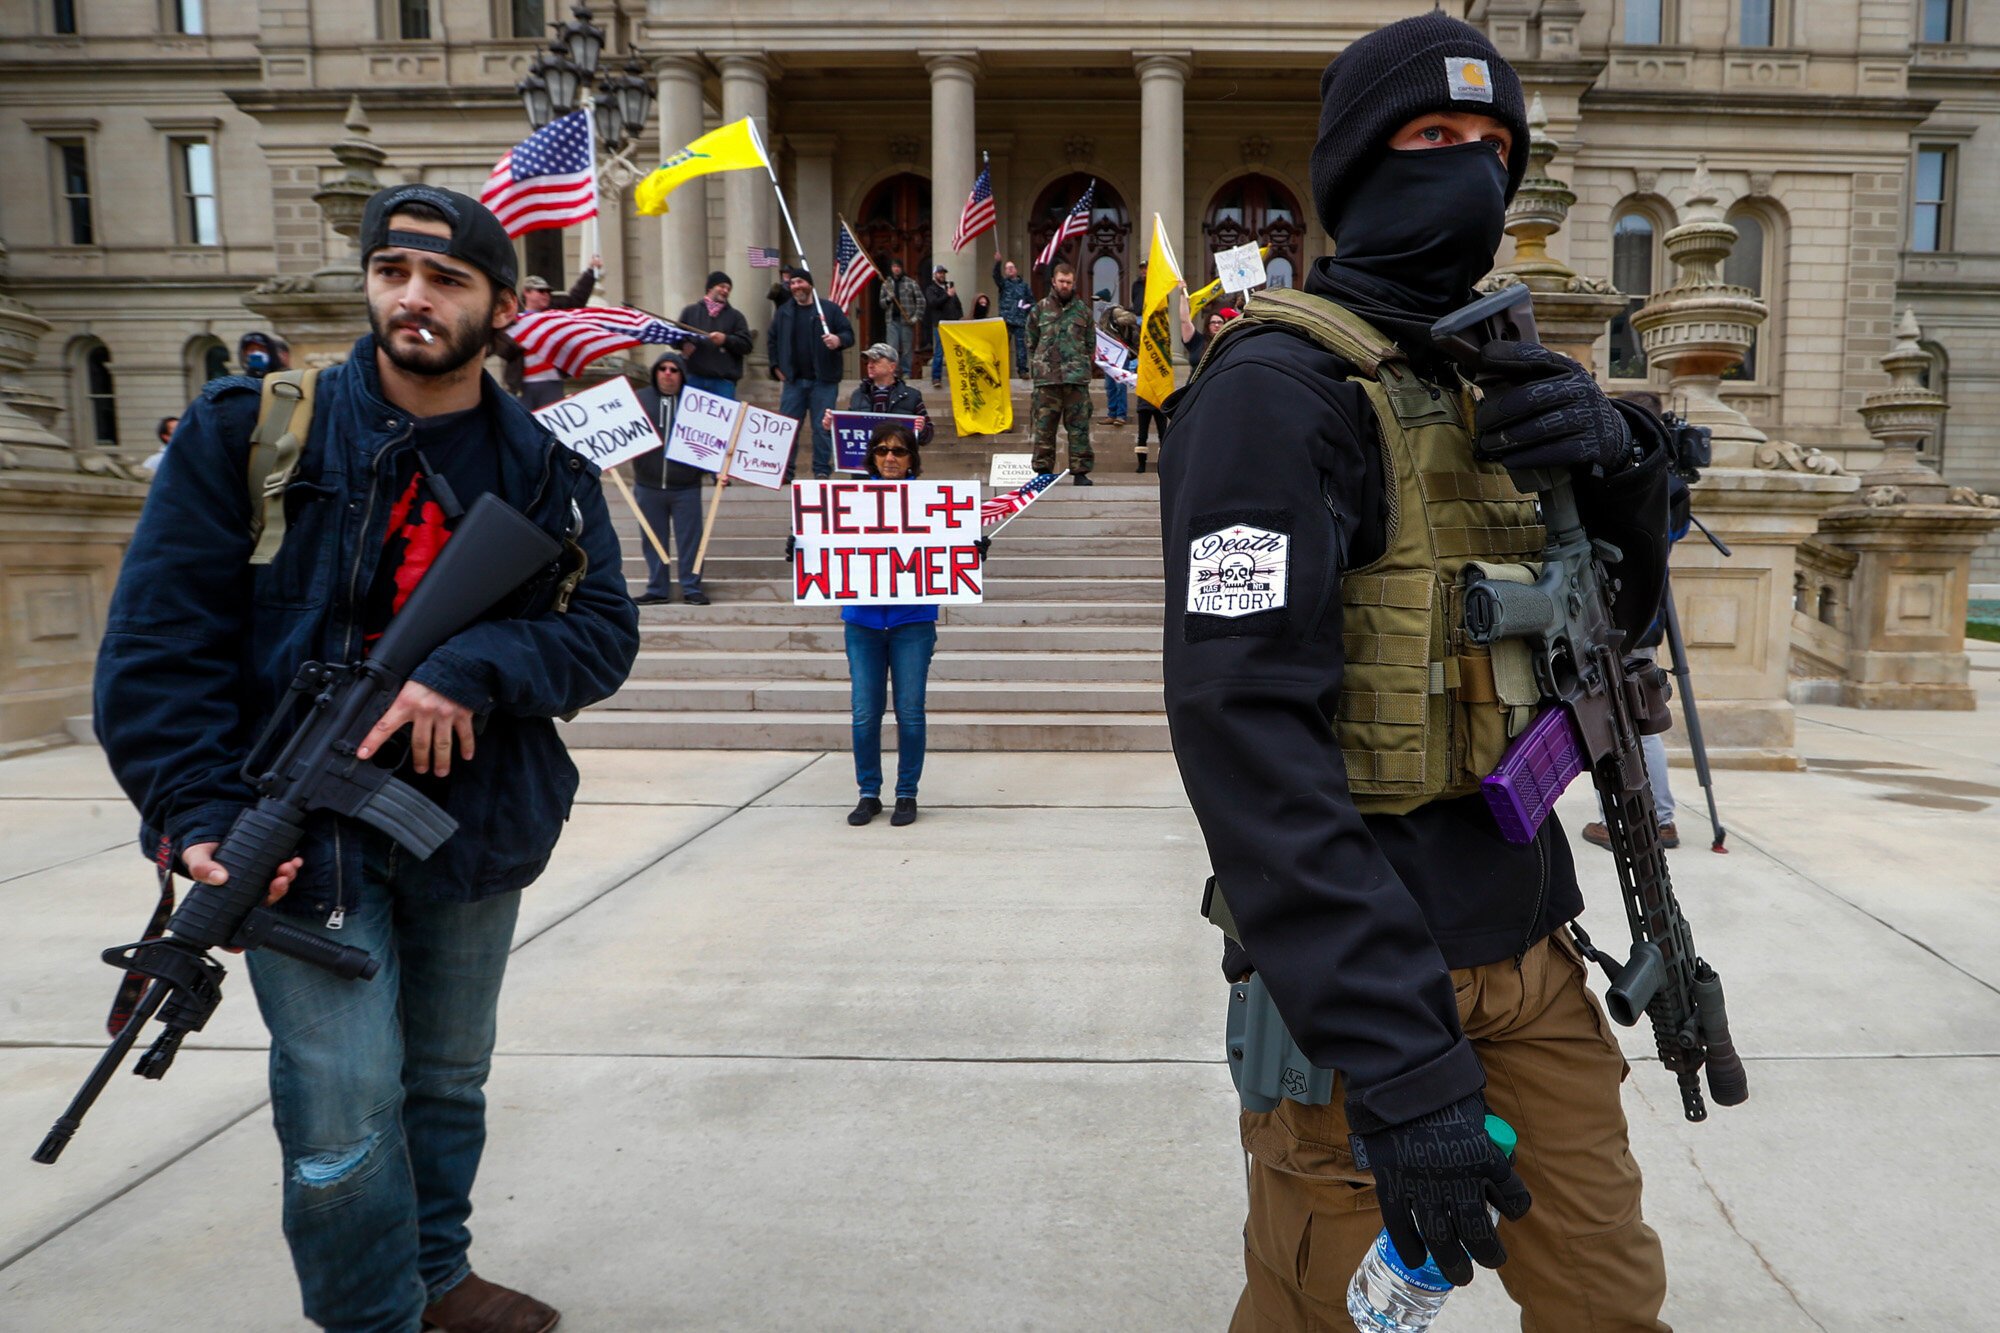  Men carry rifles near the steps of the State Capitol building in Lansing, Mich., on April 15, 2020, during a protest over Michigan Gov. Gretchen Whitmer's orders to keep people at home and businesses locked during the coronavirus outbreak. (AP Photo